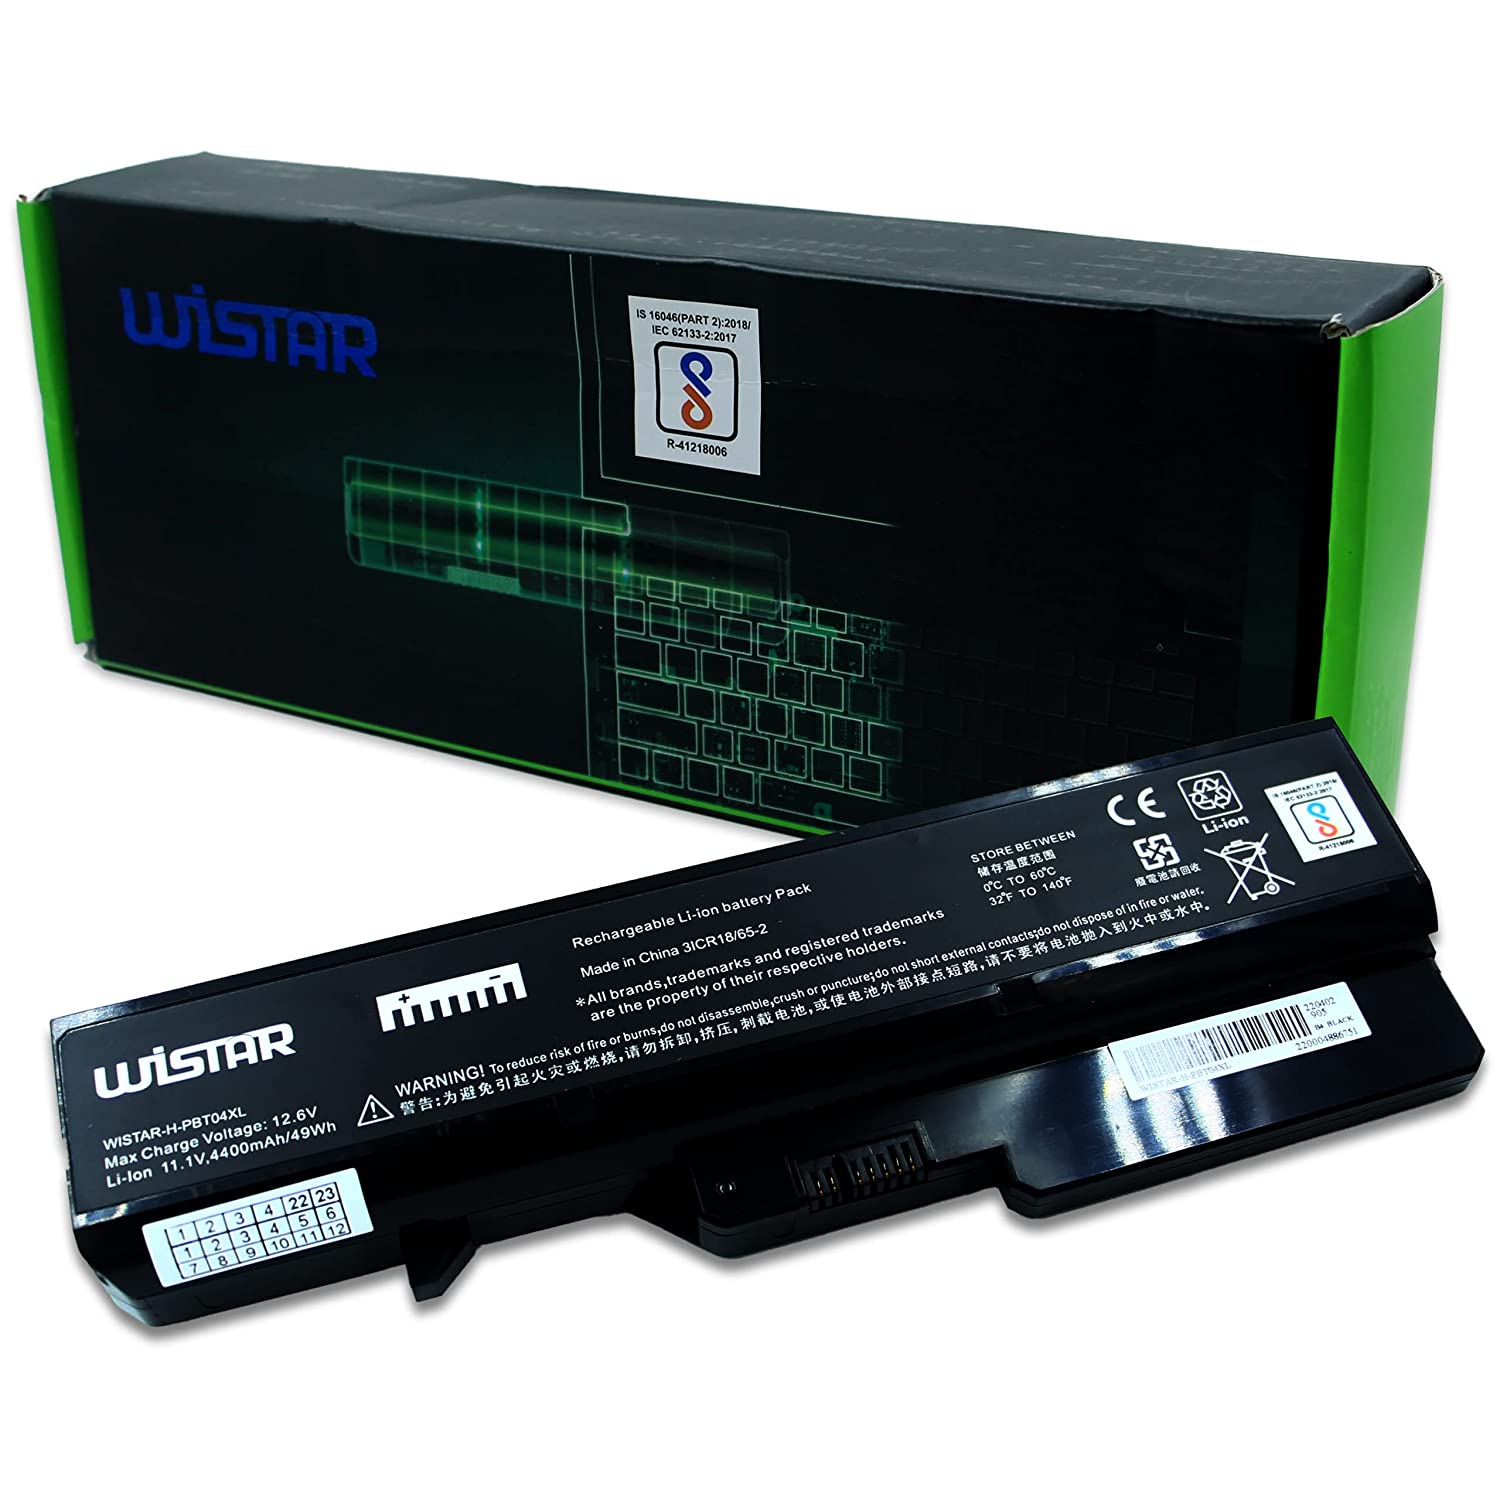 WISTAR 4400mAh Li-ion 6 Cell Laptop Battery for Lenovo B470 B570 G460 G460A G465 G470 G475 G560 G565 G570 G575 B470 B570 G460 G465 G470 G475 G560 G565 G570 G575 (Black)